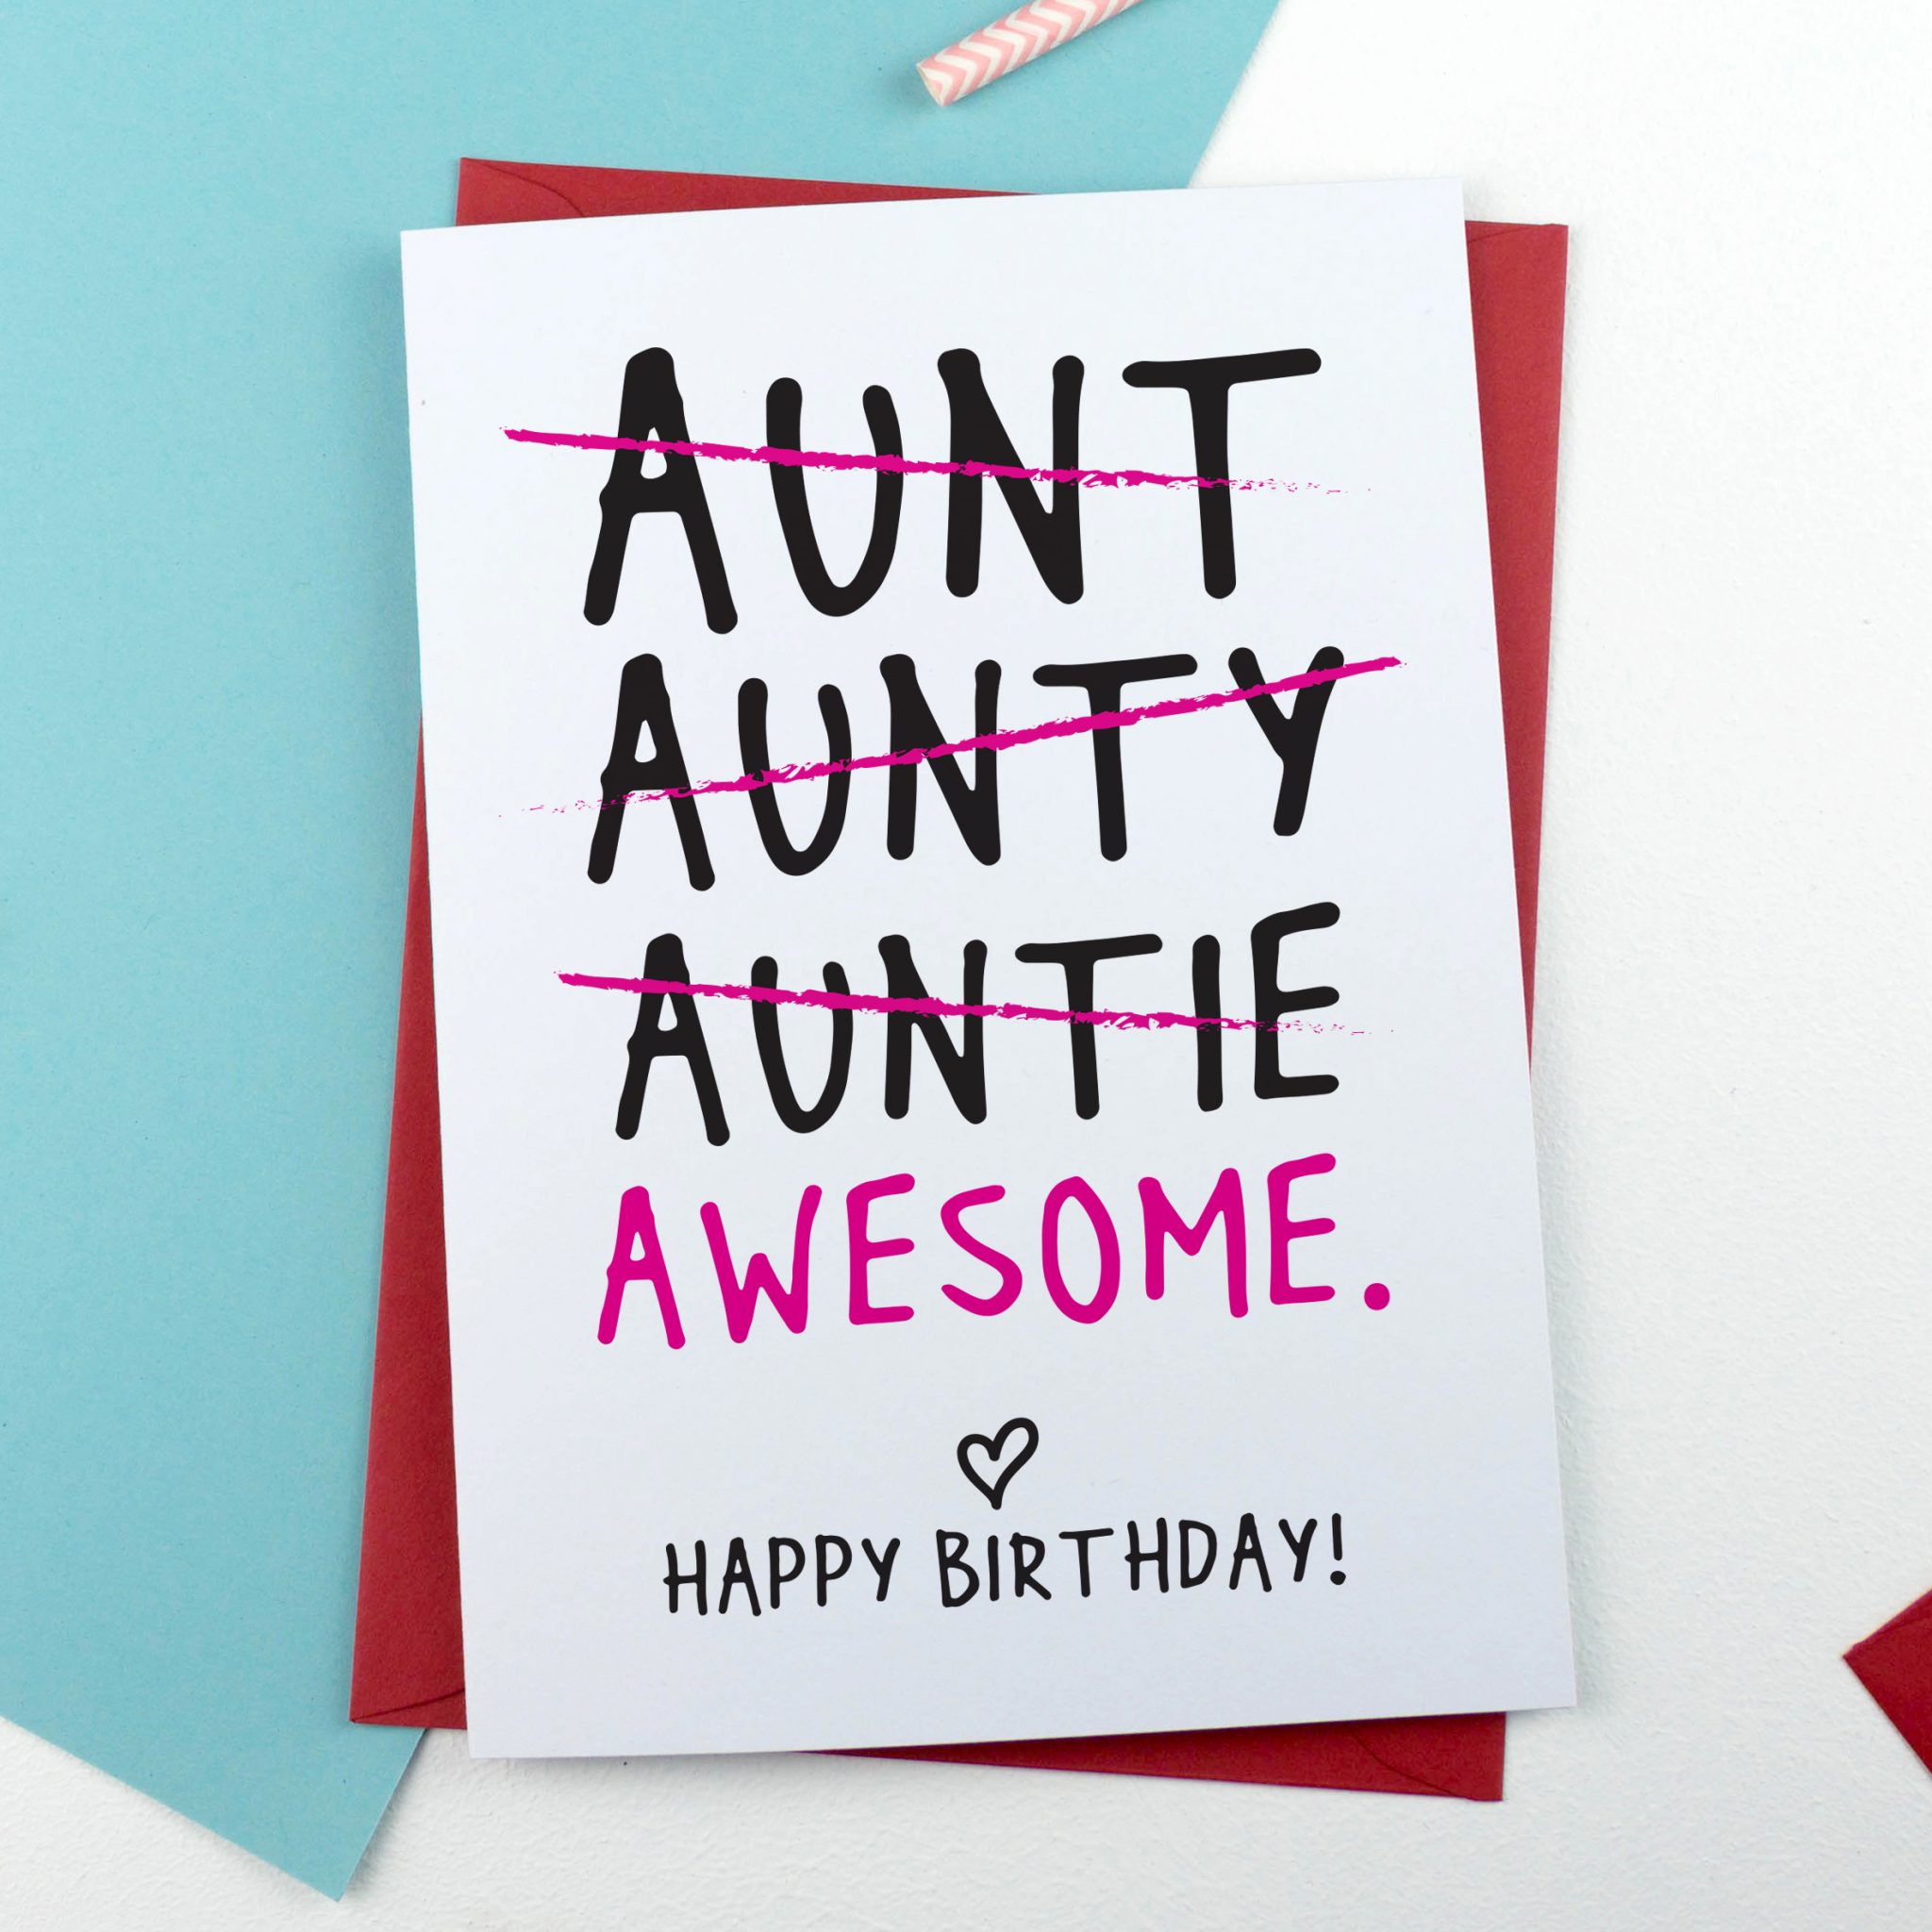 Funny Auntie Birthday Card Personalised Funny Auntie Birthday Card